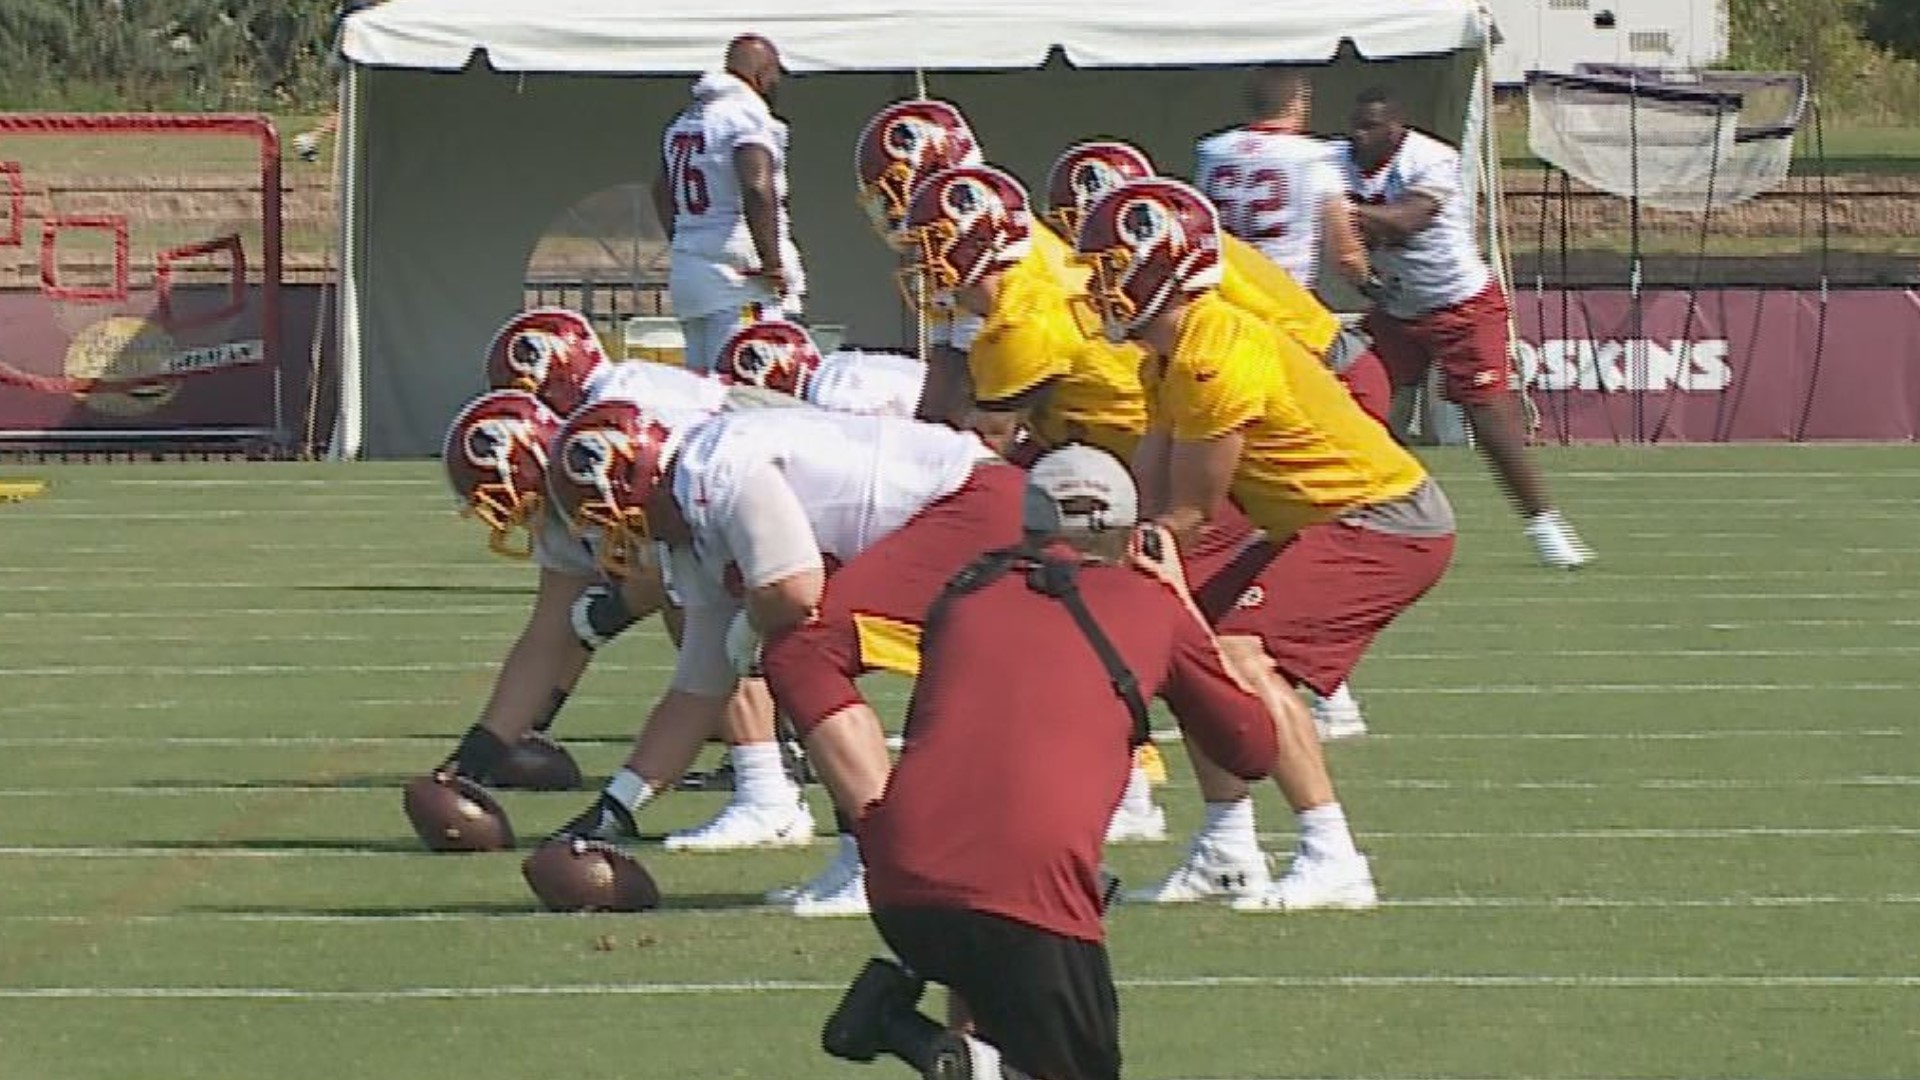 The three-way battle is between rookie, Dwayne Haskins and veterans, Colt McCoy and Case Keenum.